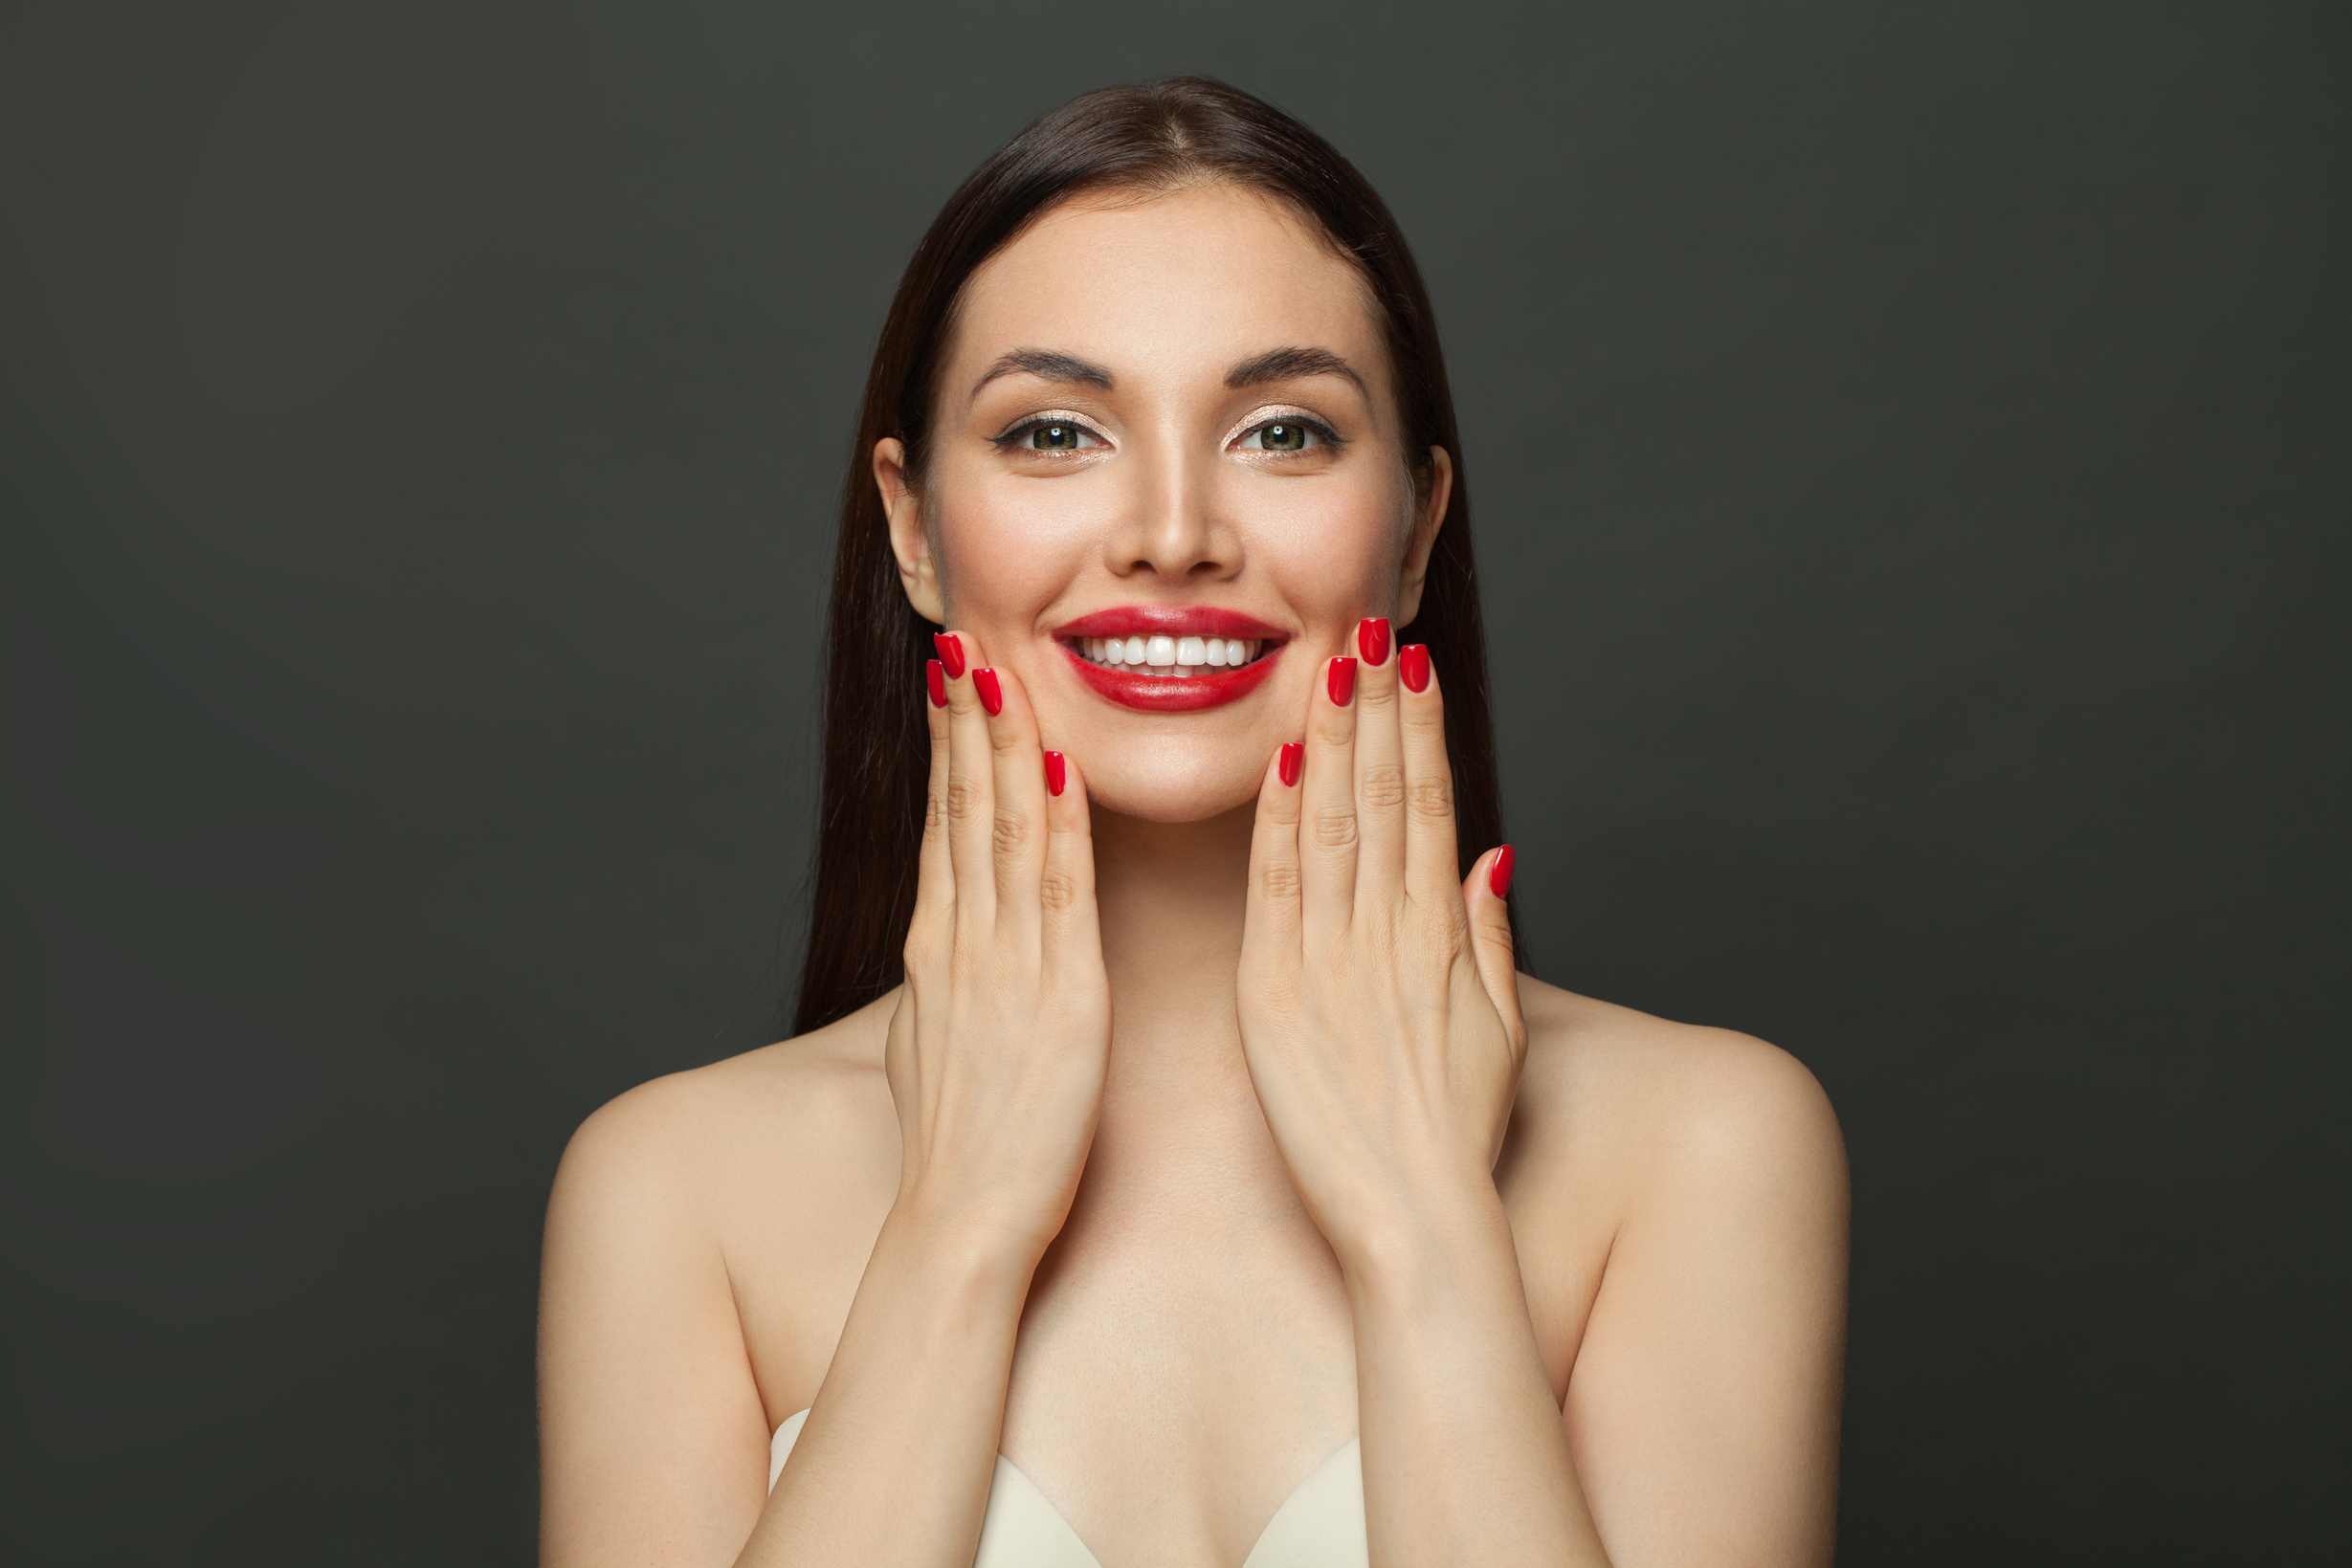 Healthy model woman showing red manicured nails